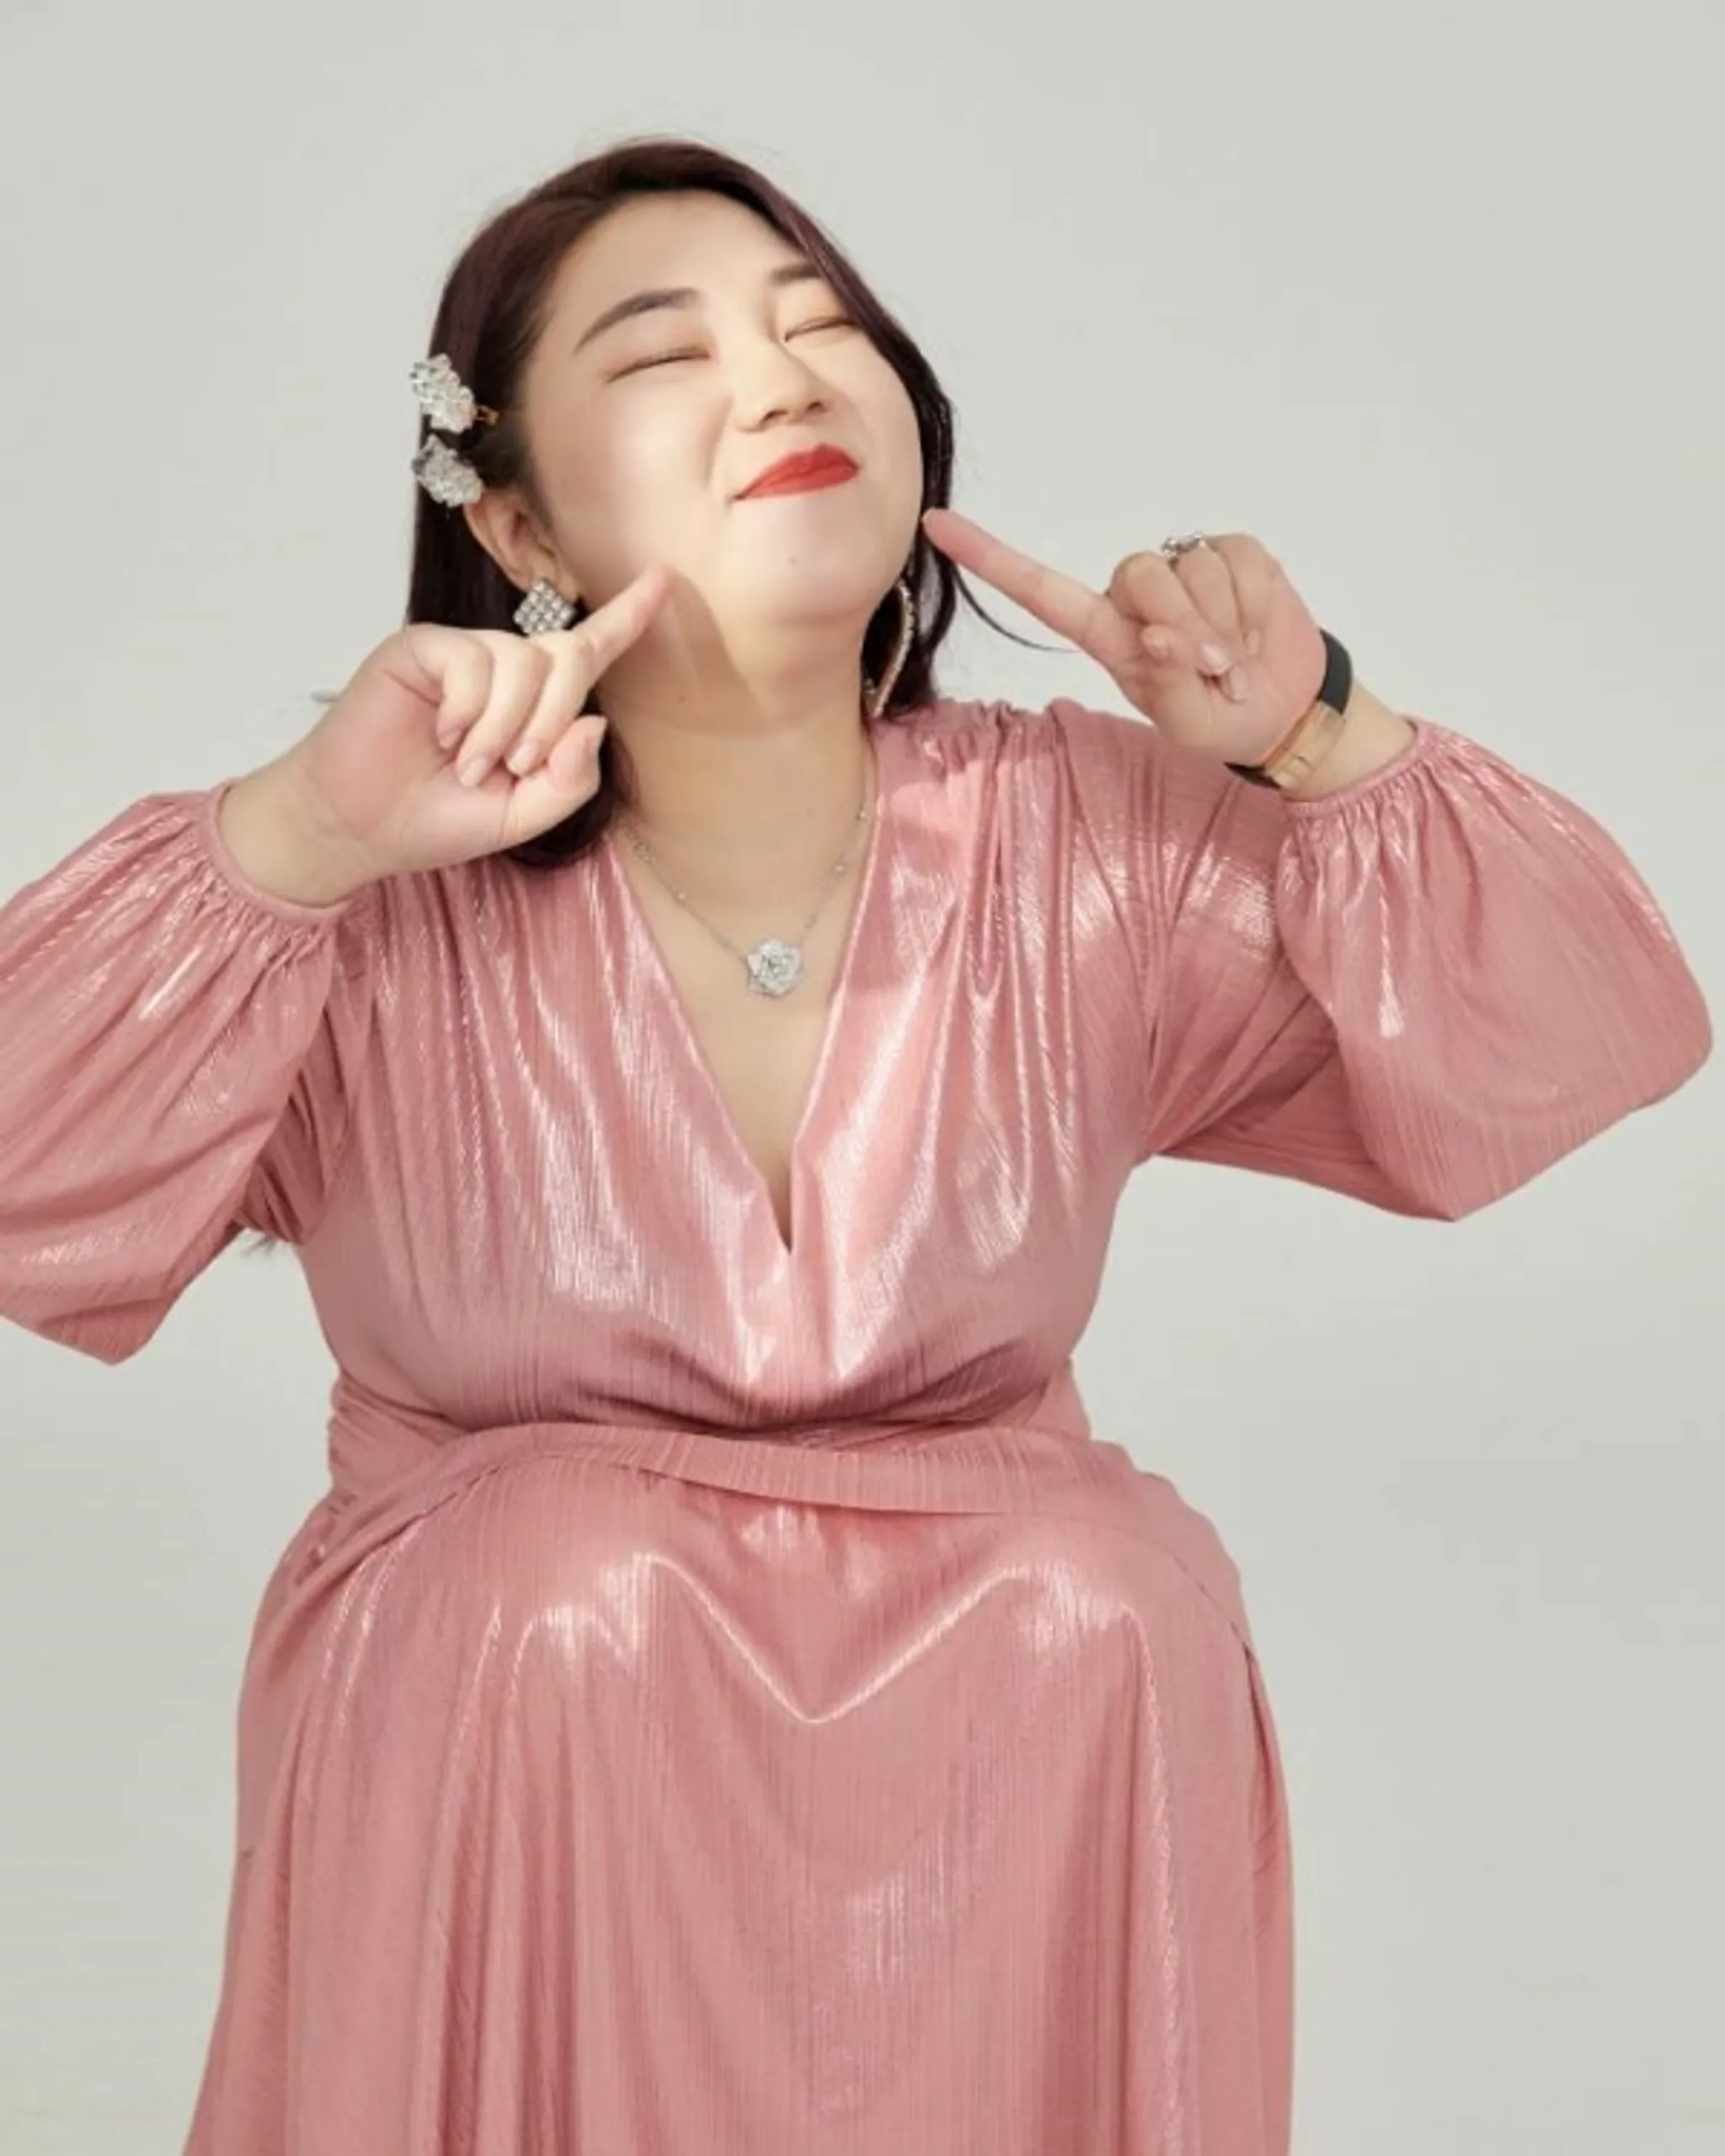 chinese plus size model